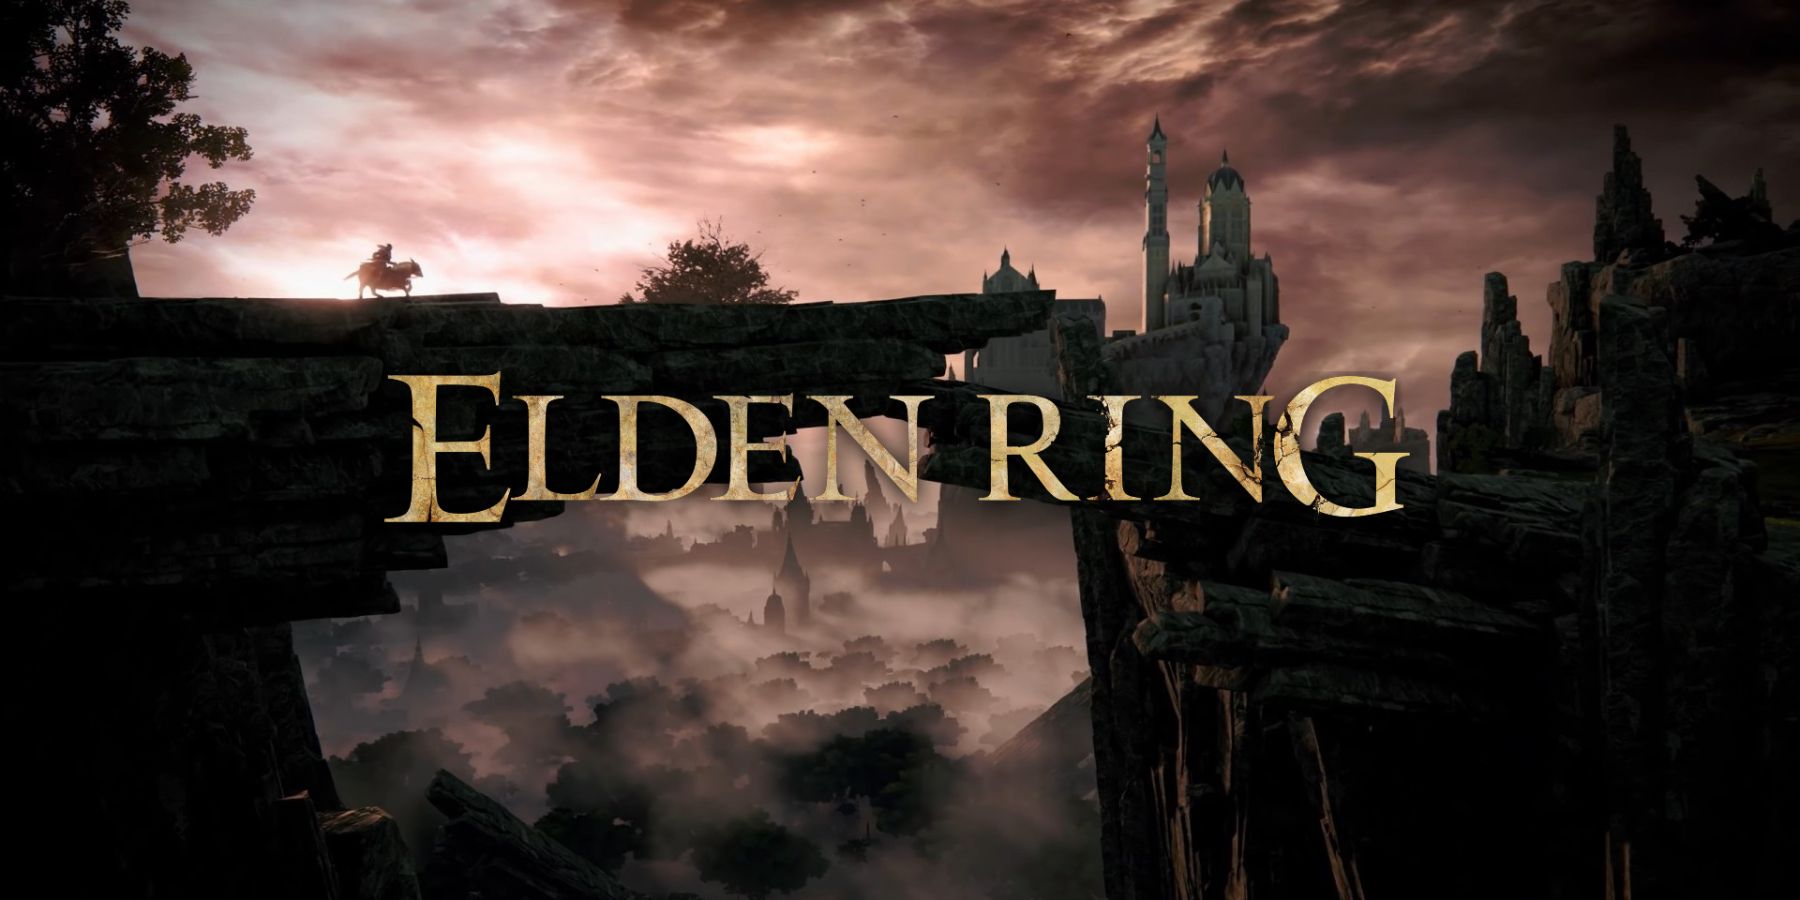 FromSoftware has set Elden Ring apart from the Souls games by not having the word &quot;souls&quot; in the title